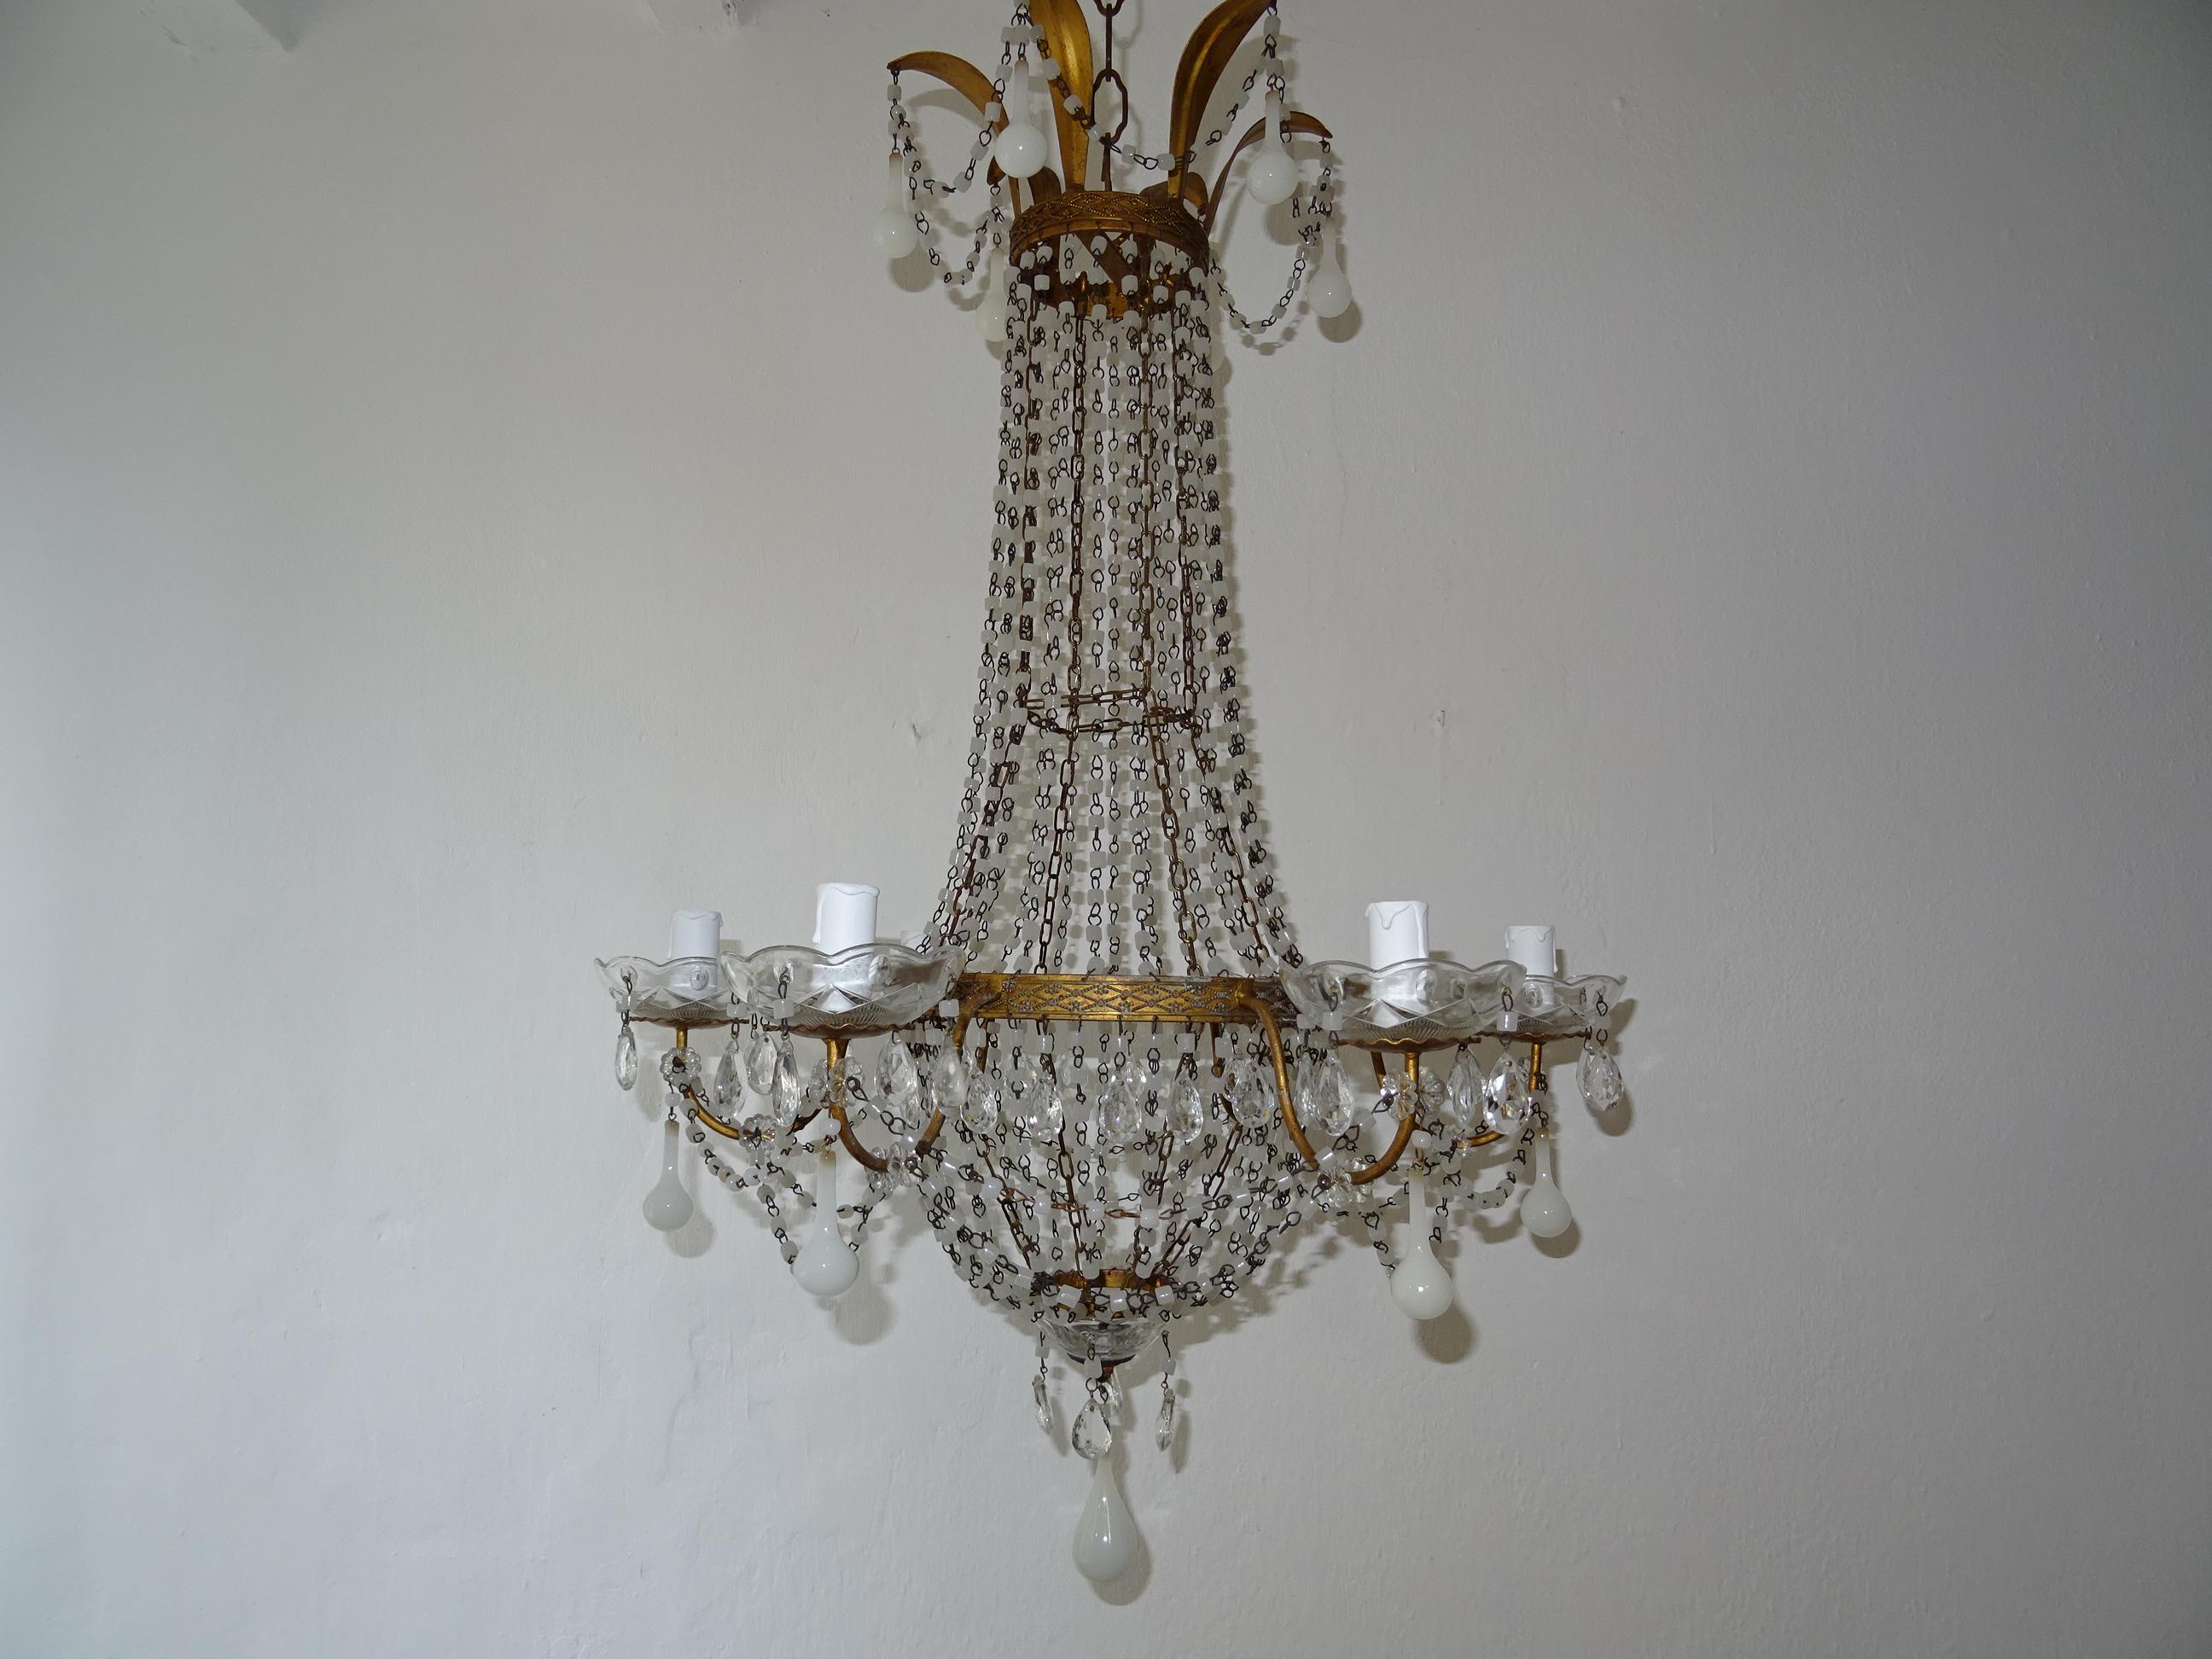 Housing 6 lights, sitting in crystal bobéches, dripping with white opaline beads and vintage crystal prisms.  Will be rewired with certified UL US sockets for the USA and appropriate sockets for all other countries and ready to hang. Metal body with